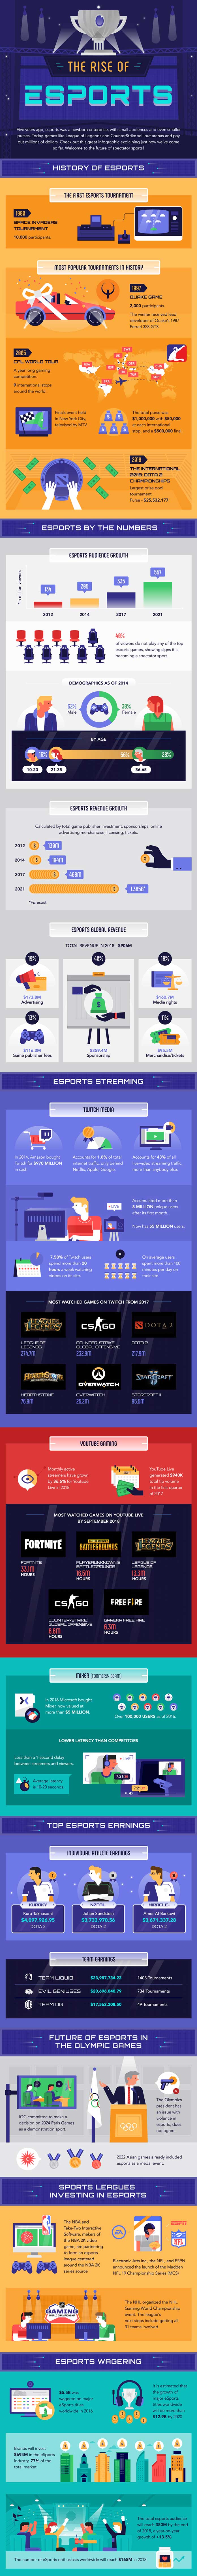 Esports made a successful debut at the 2018 Asian games and appearance at the Olympics is most likely. (Infographics: NJgames) – Tech Observer